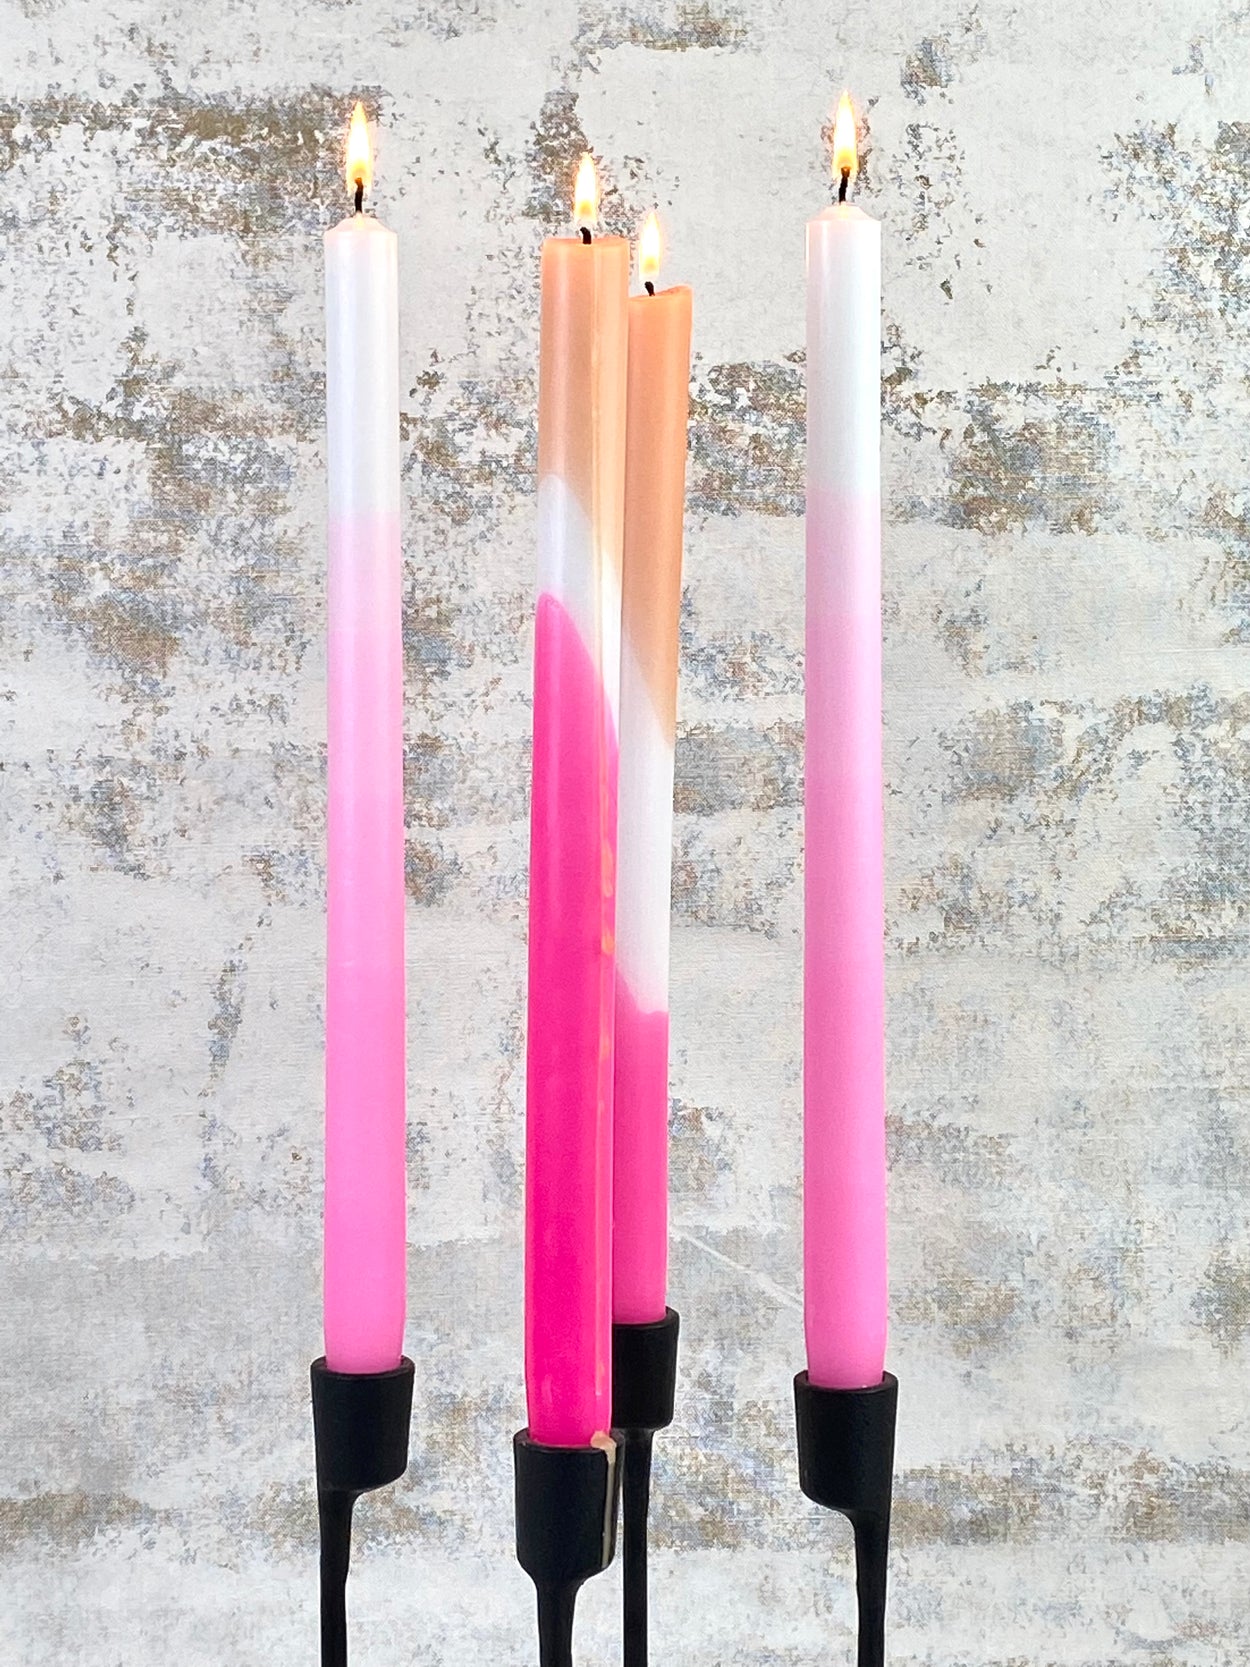 Lit Pink Ombre Candles Pair with pink splash candles on black candleholder on white distressed background